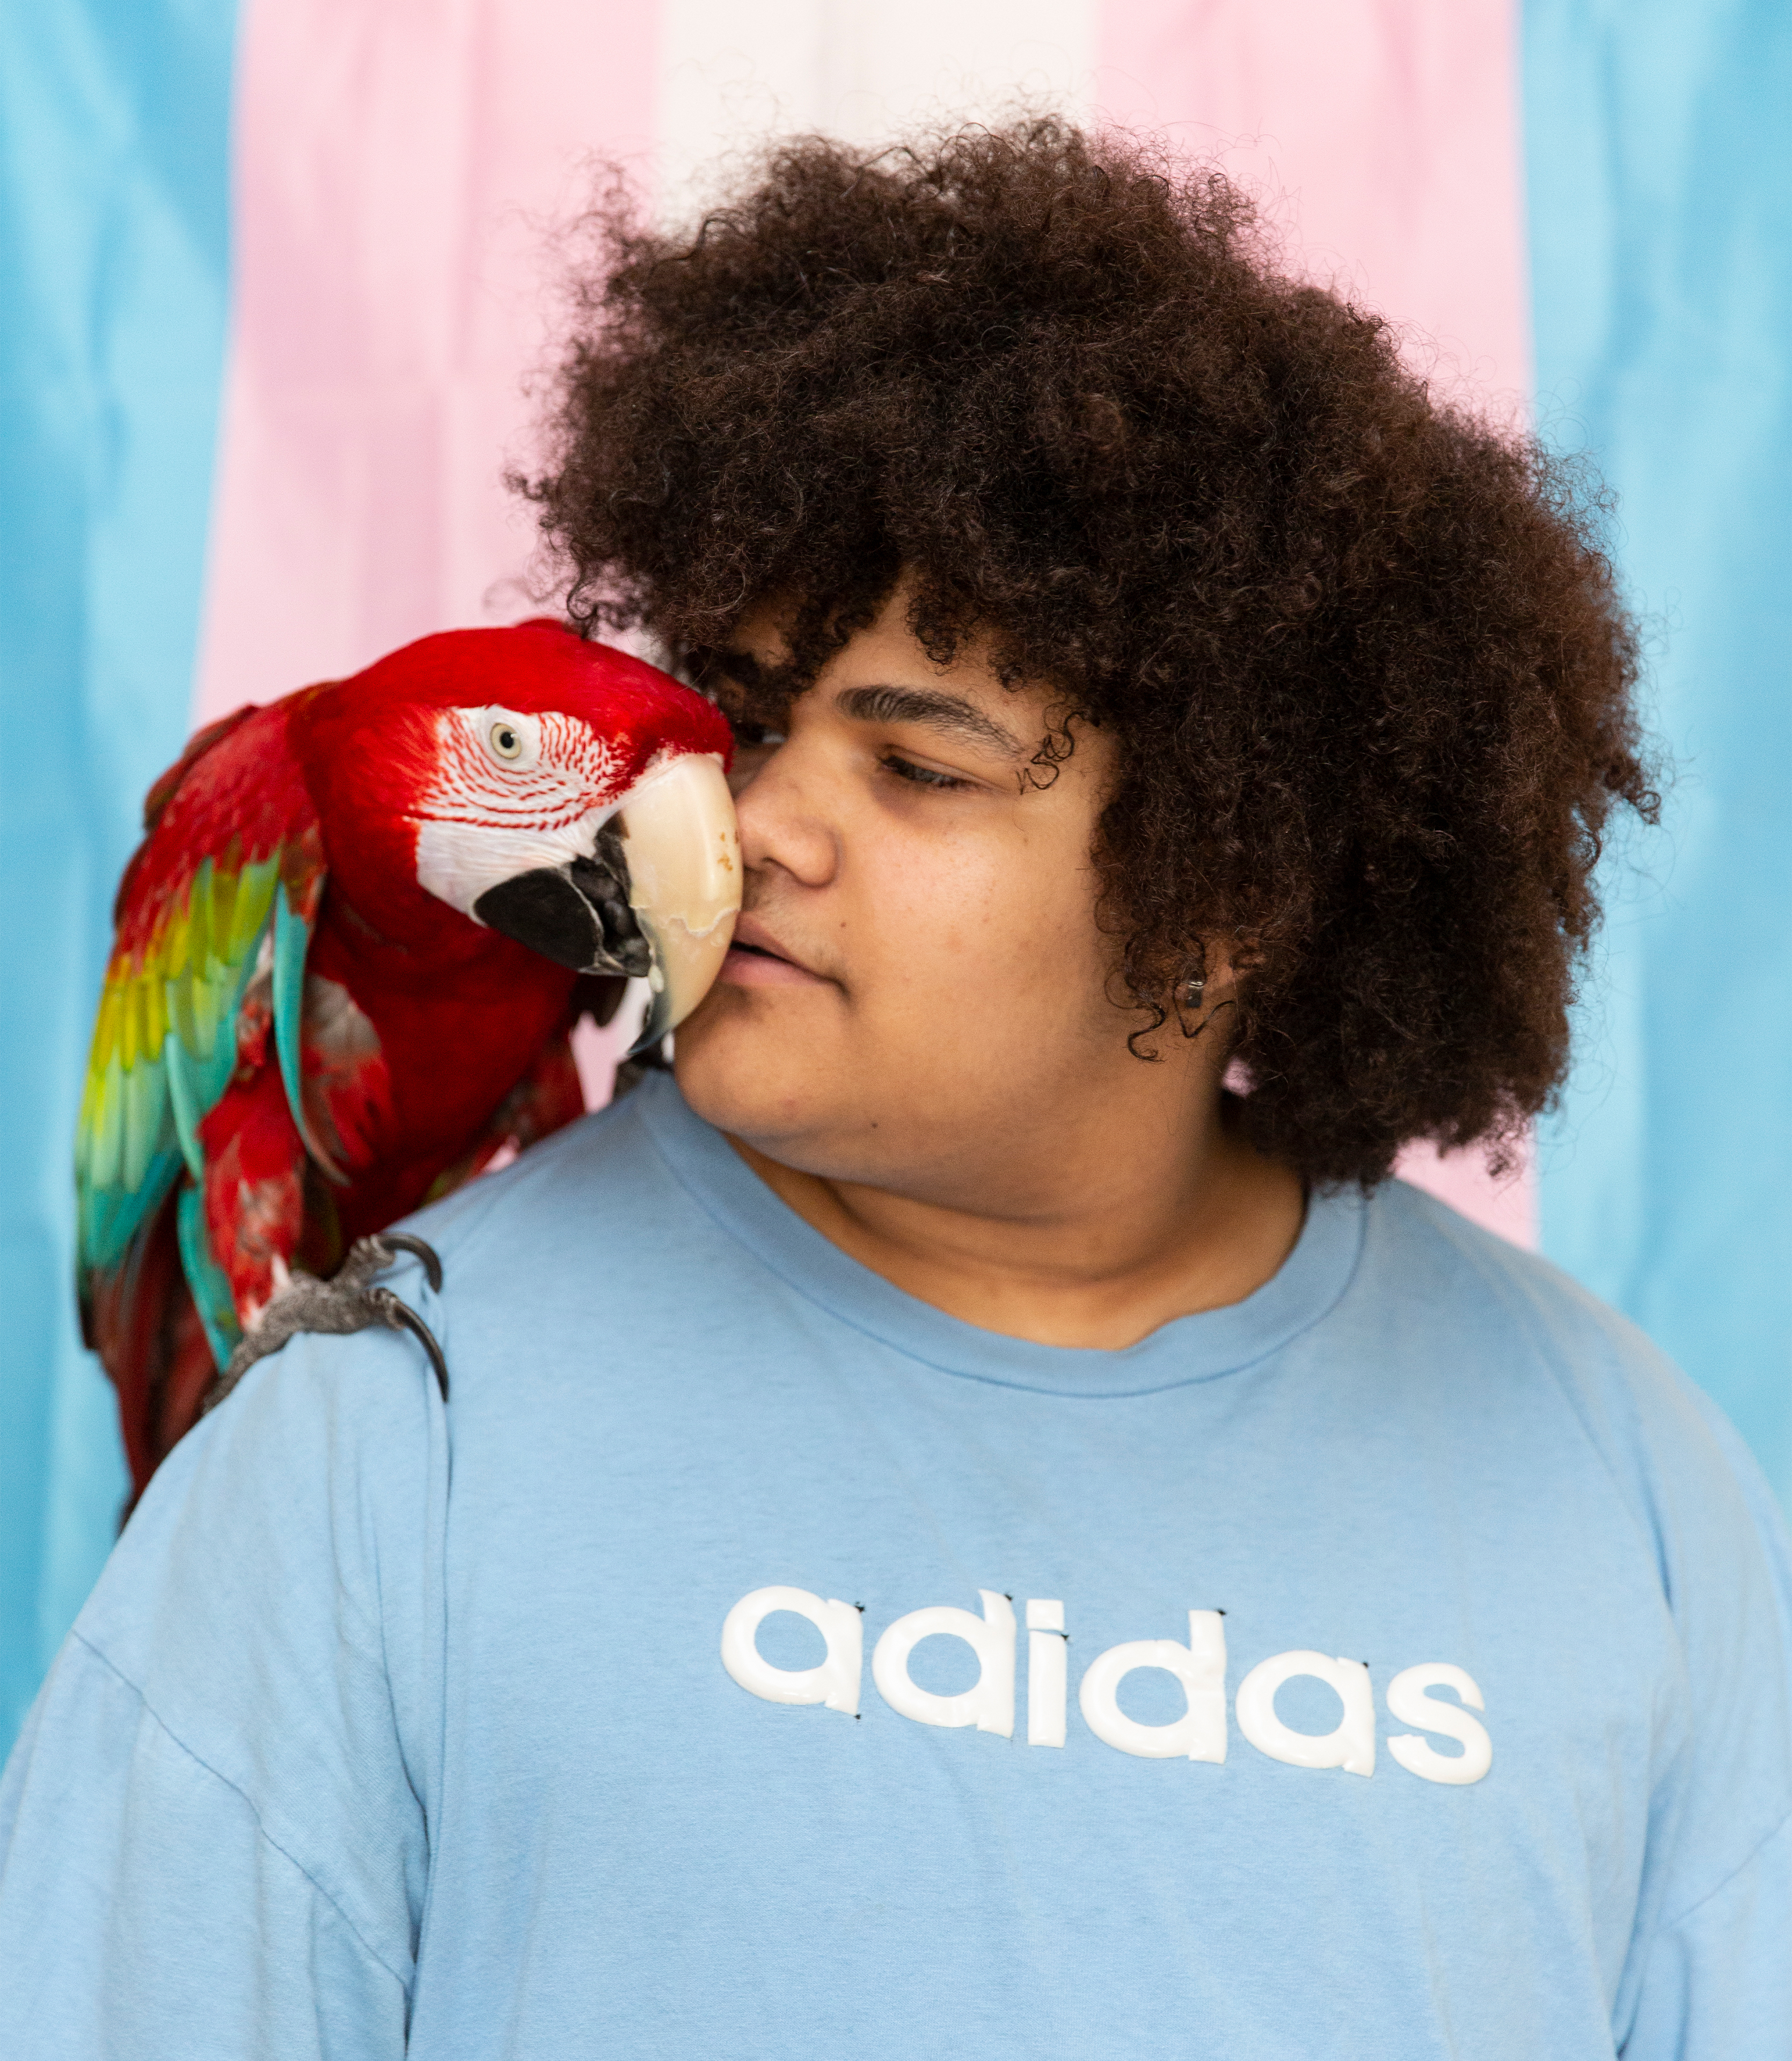 A photo shows Cameron Wright standing with his parrot, Mango, resting on his shoulder. A transgender pride flag fills the background behind him.